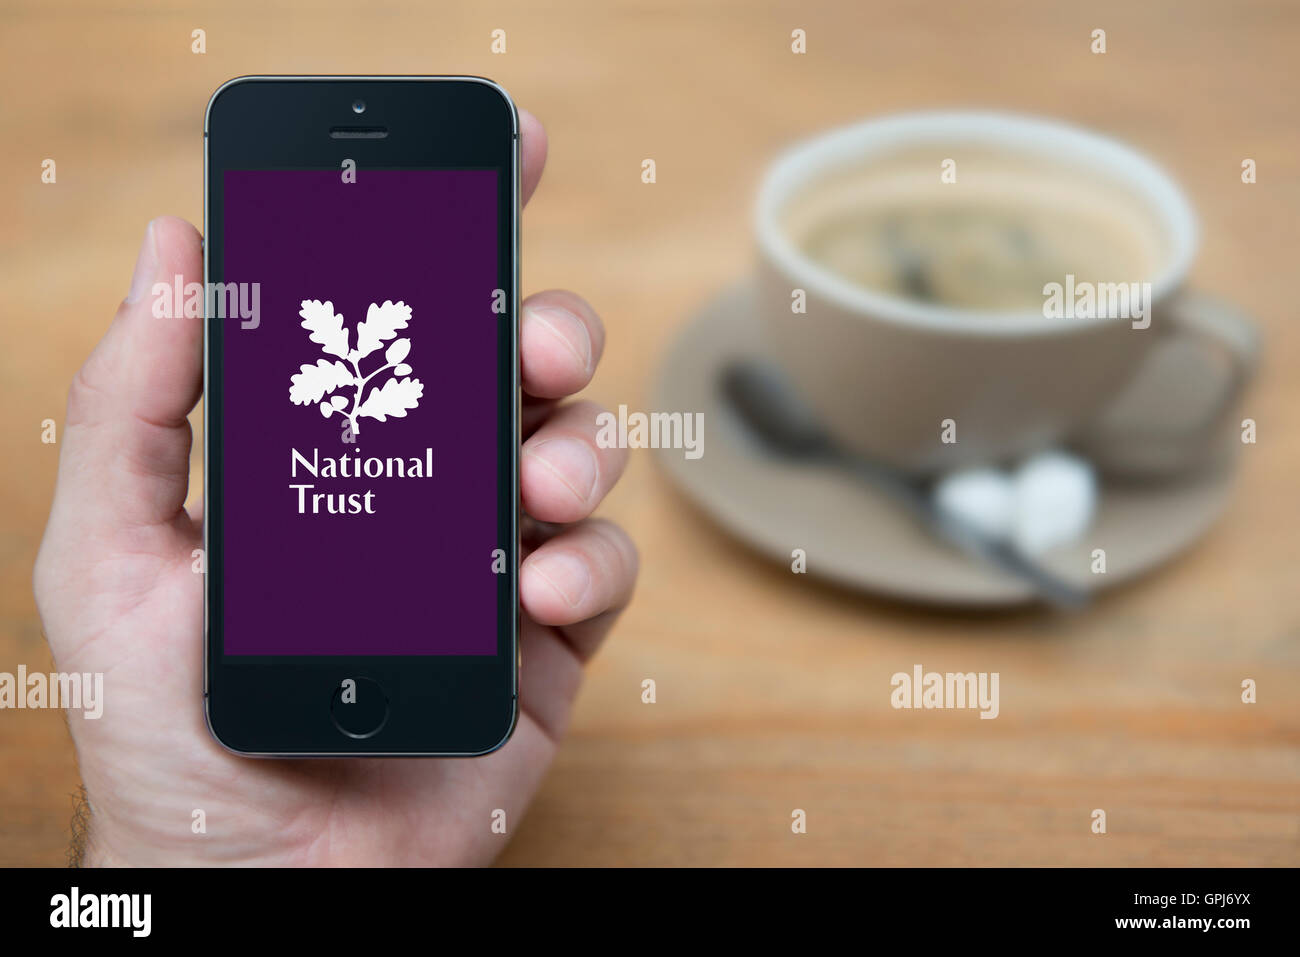 A man looks at his iPhone which displays the National Trust logo, while sat with a cup of coffee (Editorial use only). Stock Photo